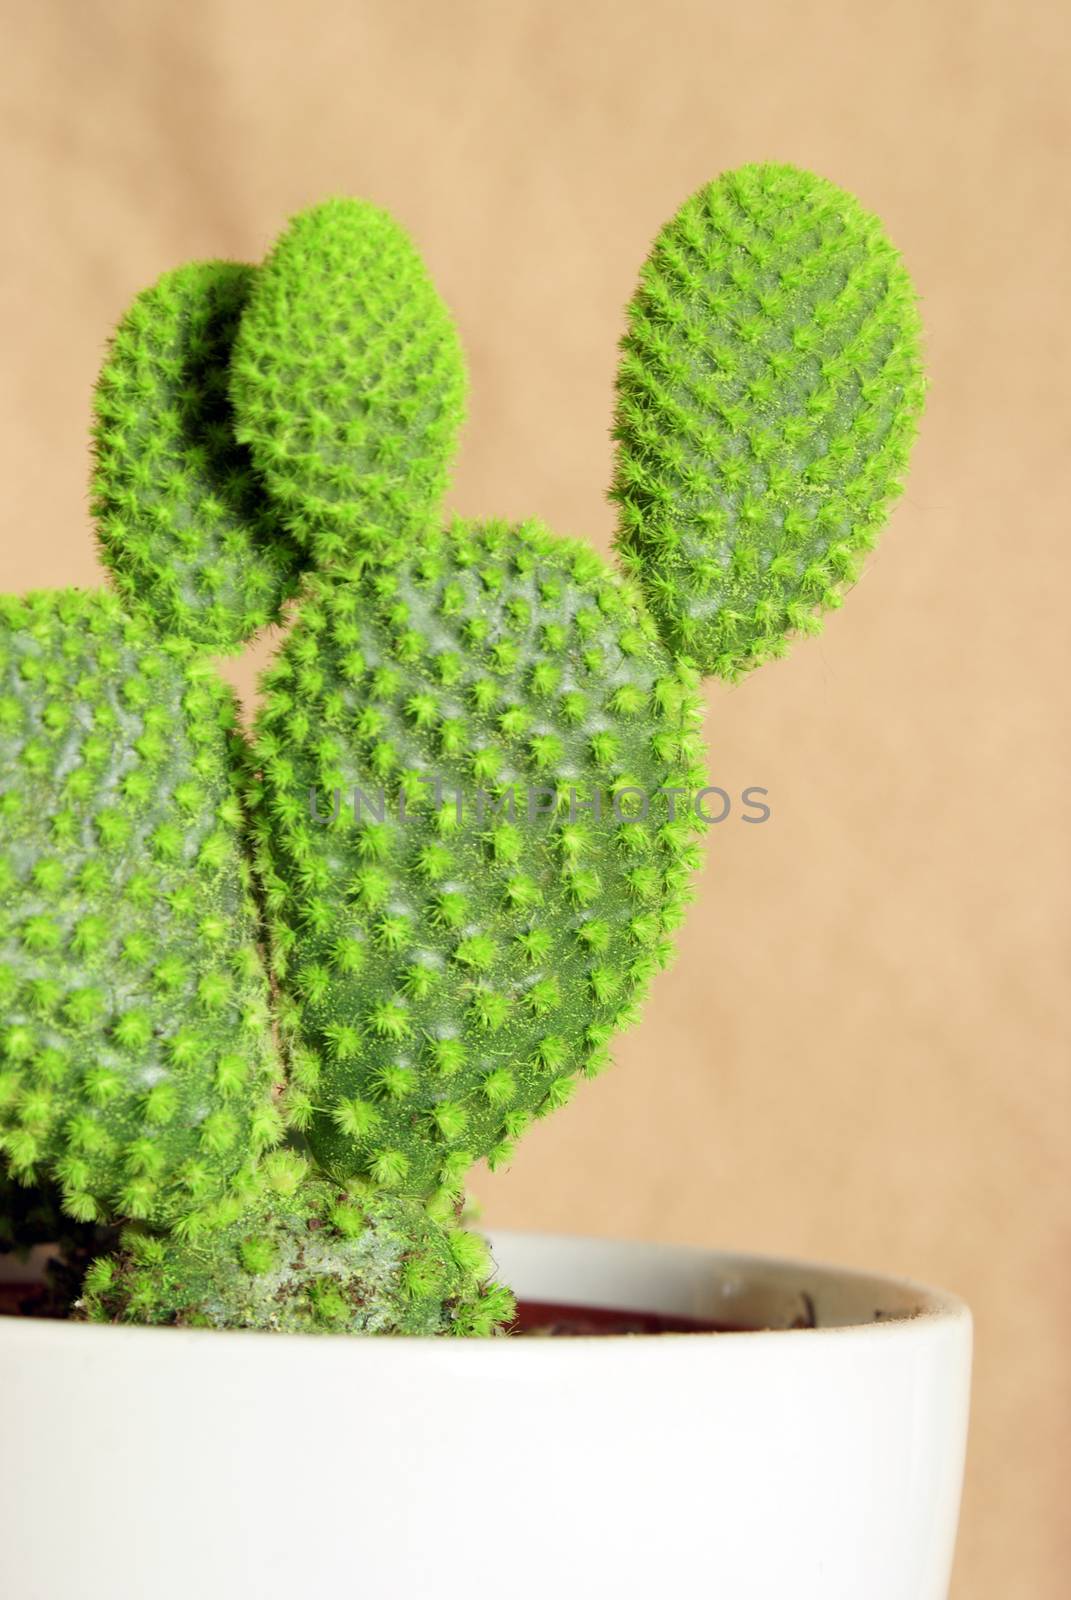 A closeup view of a vibrant and healthy potted cactus houseplant.